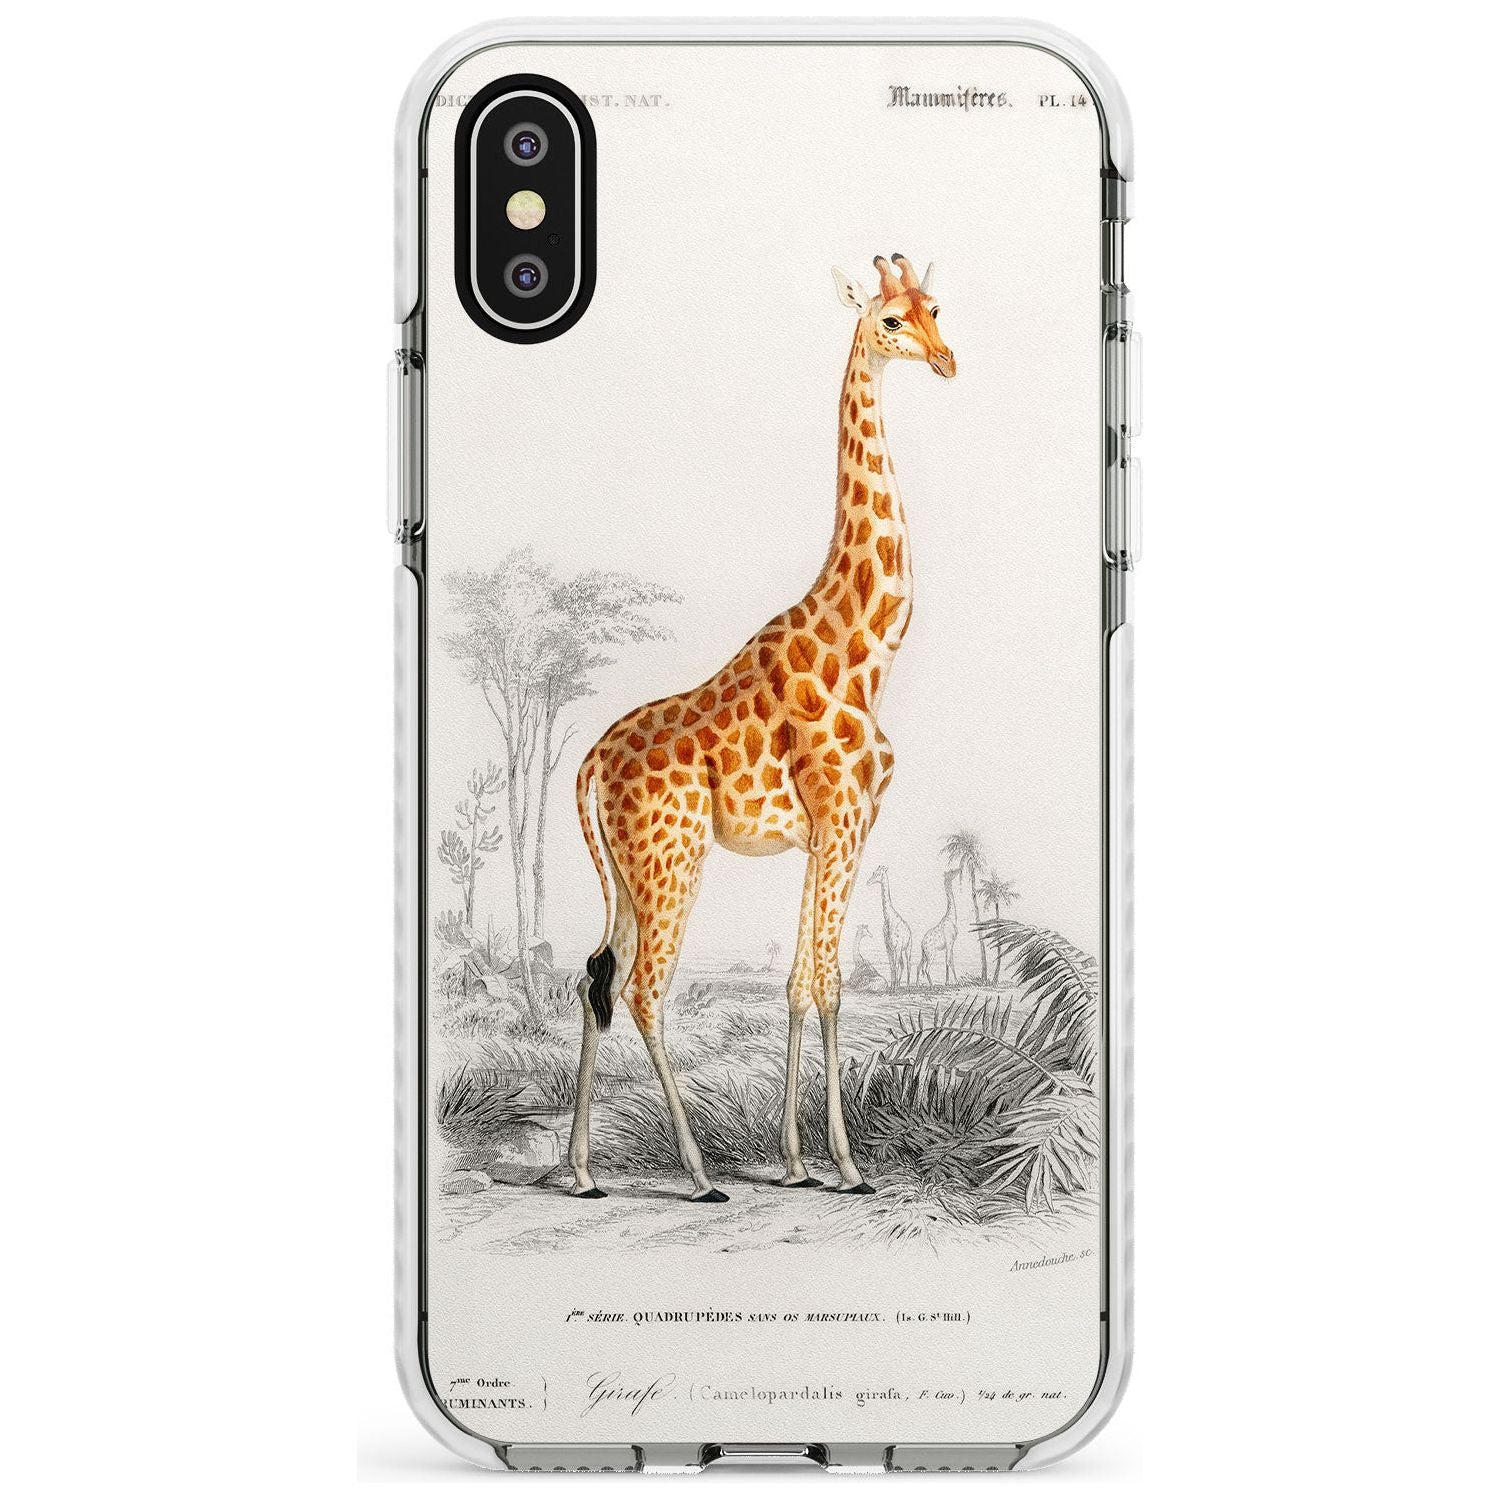 Vintage Girafe Art Impact Phone Case for iPhone X XS Max XR